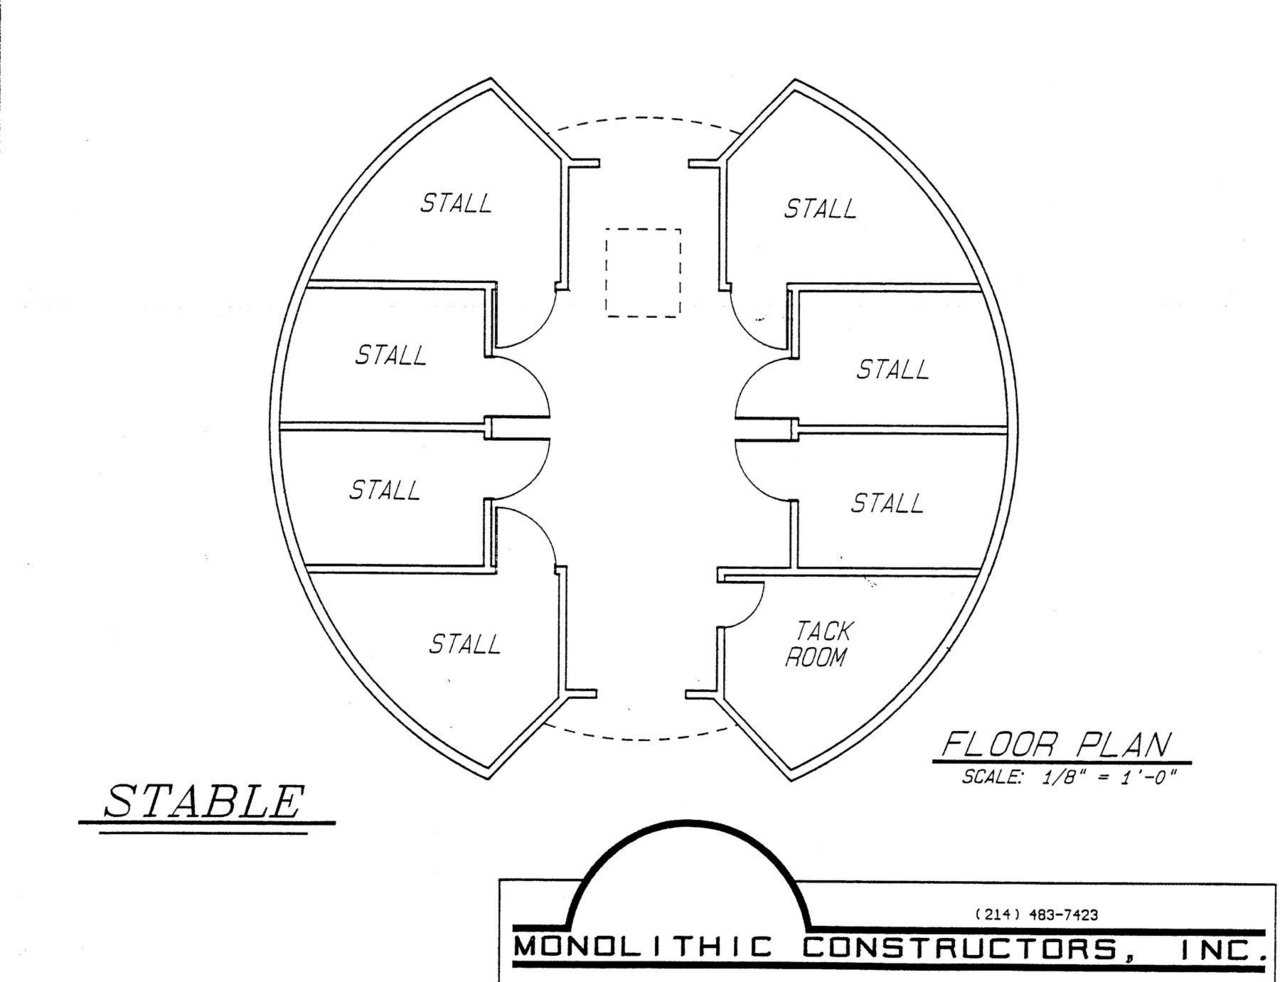 Sample layout of small horse stable.